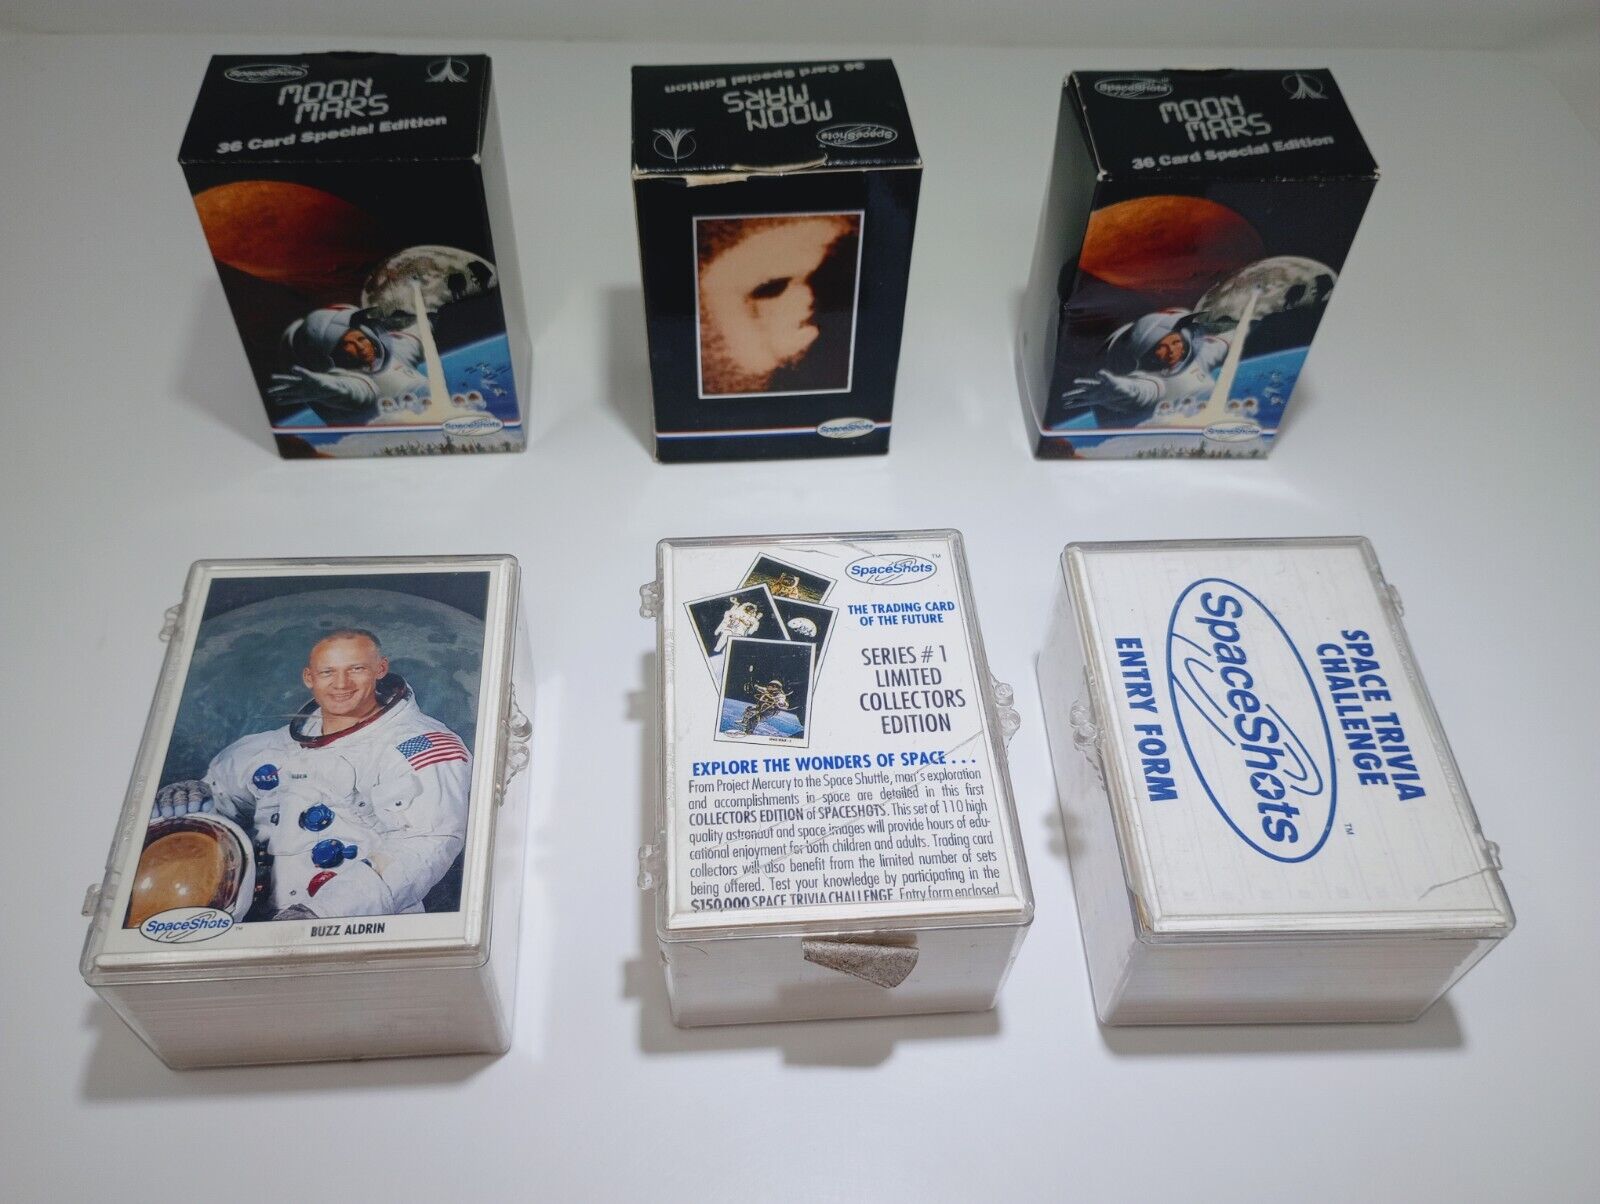 3 Space Shots Moon Mars 36 Card Special Edition 1991 + 3 Series 1 Limited Sets